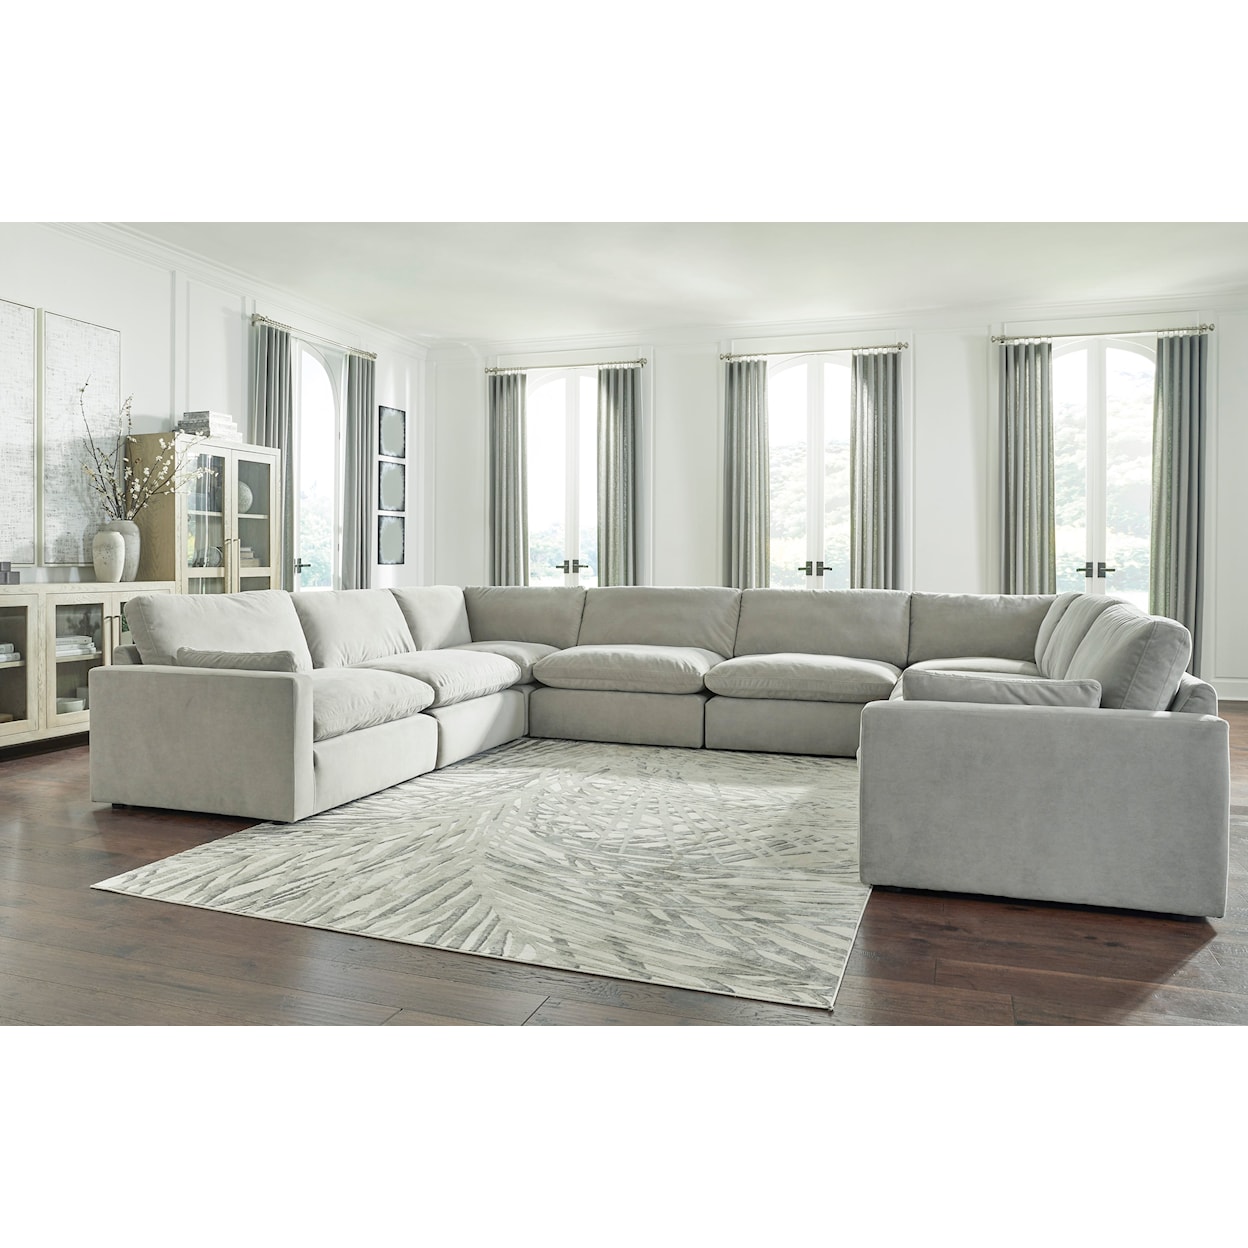 Signature Design by Ashley Sophie 8-Piece Sectional